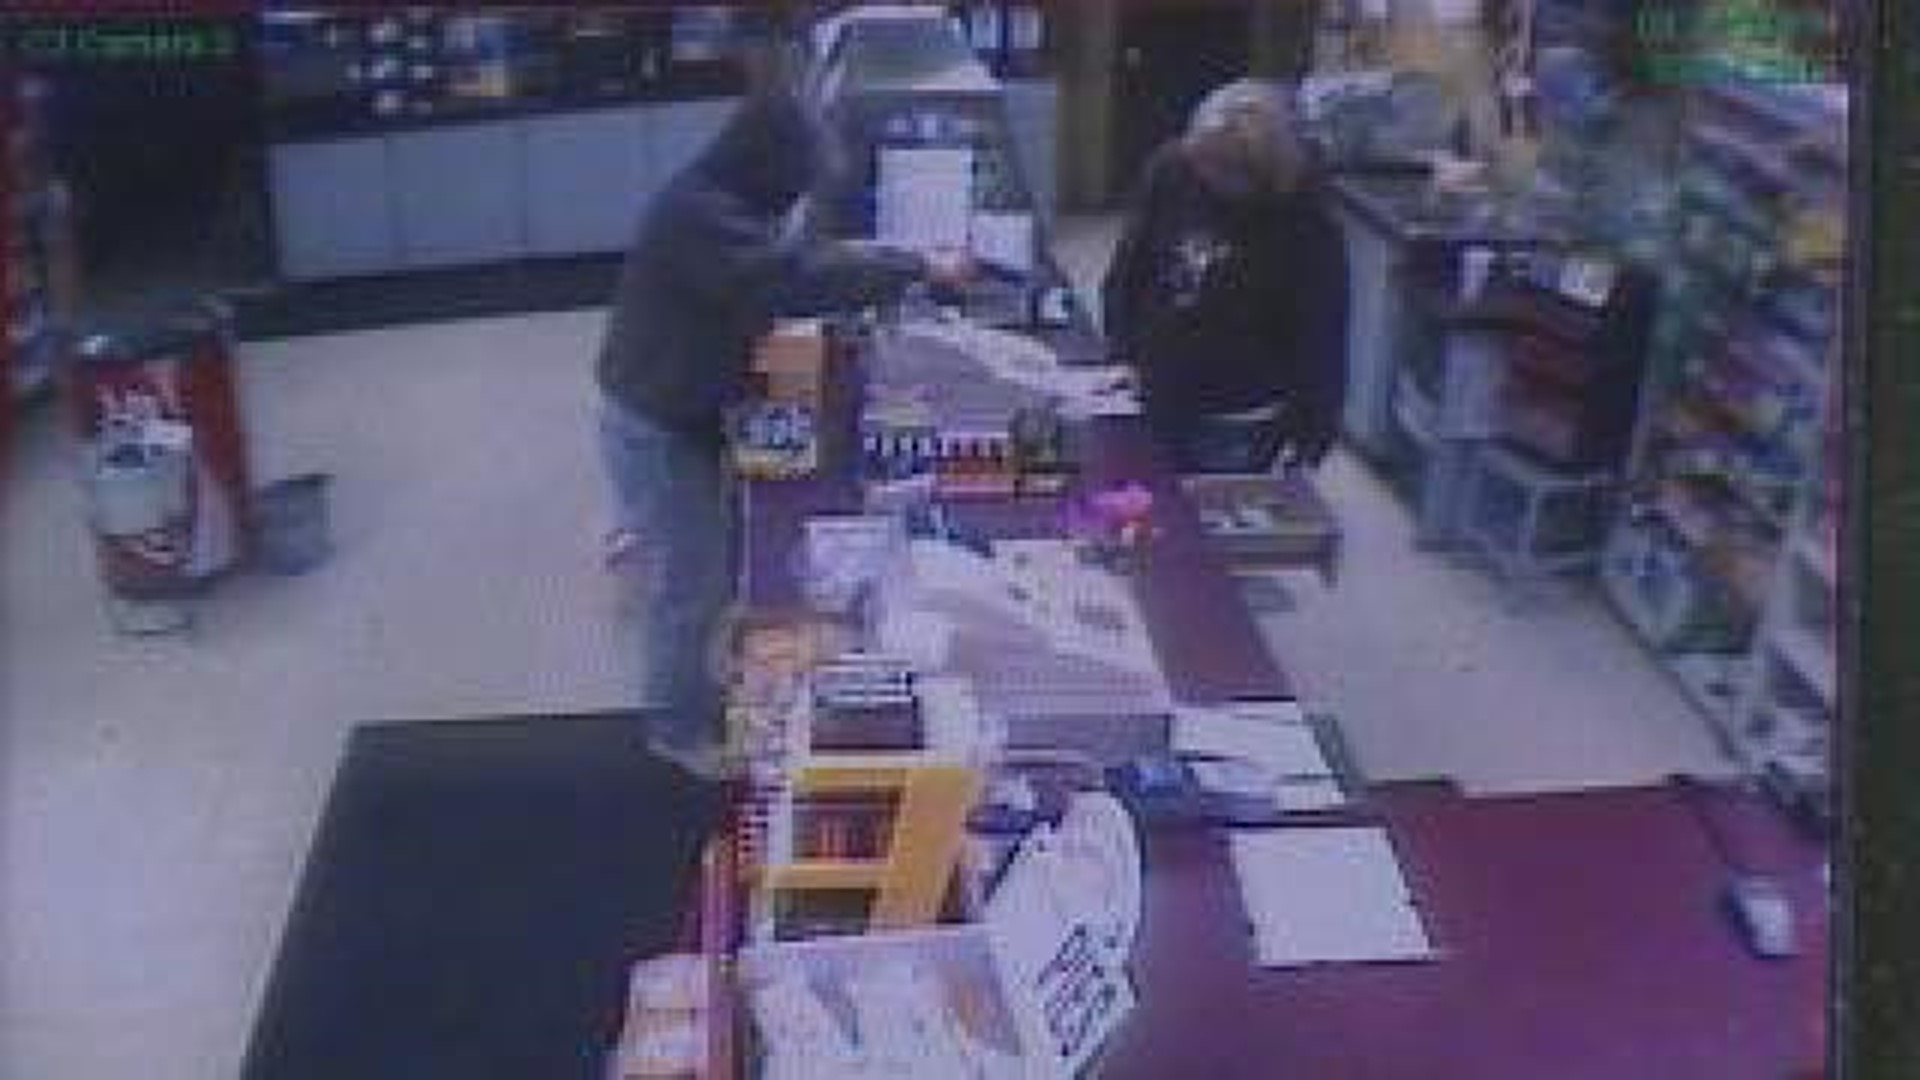 Armed Robbery Suspect Identified